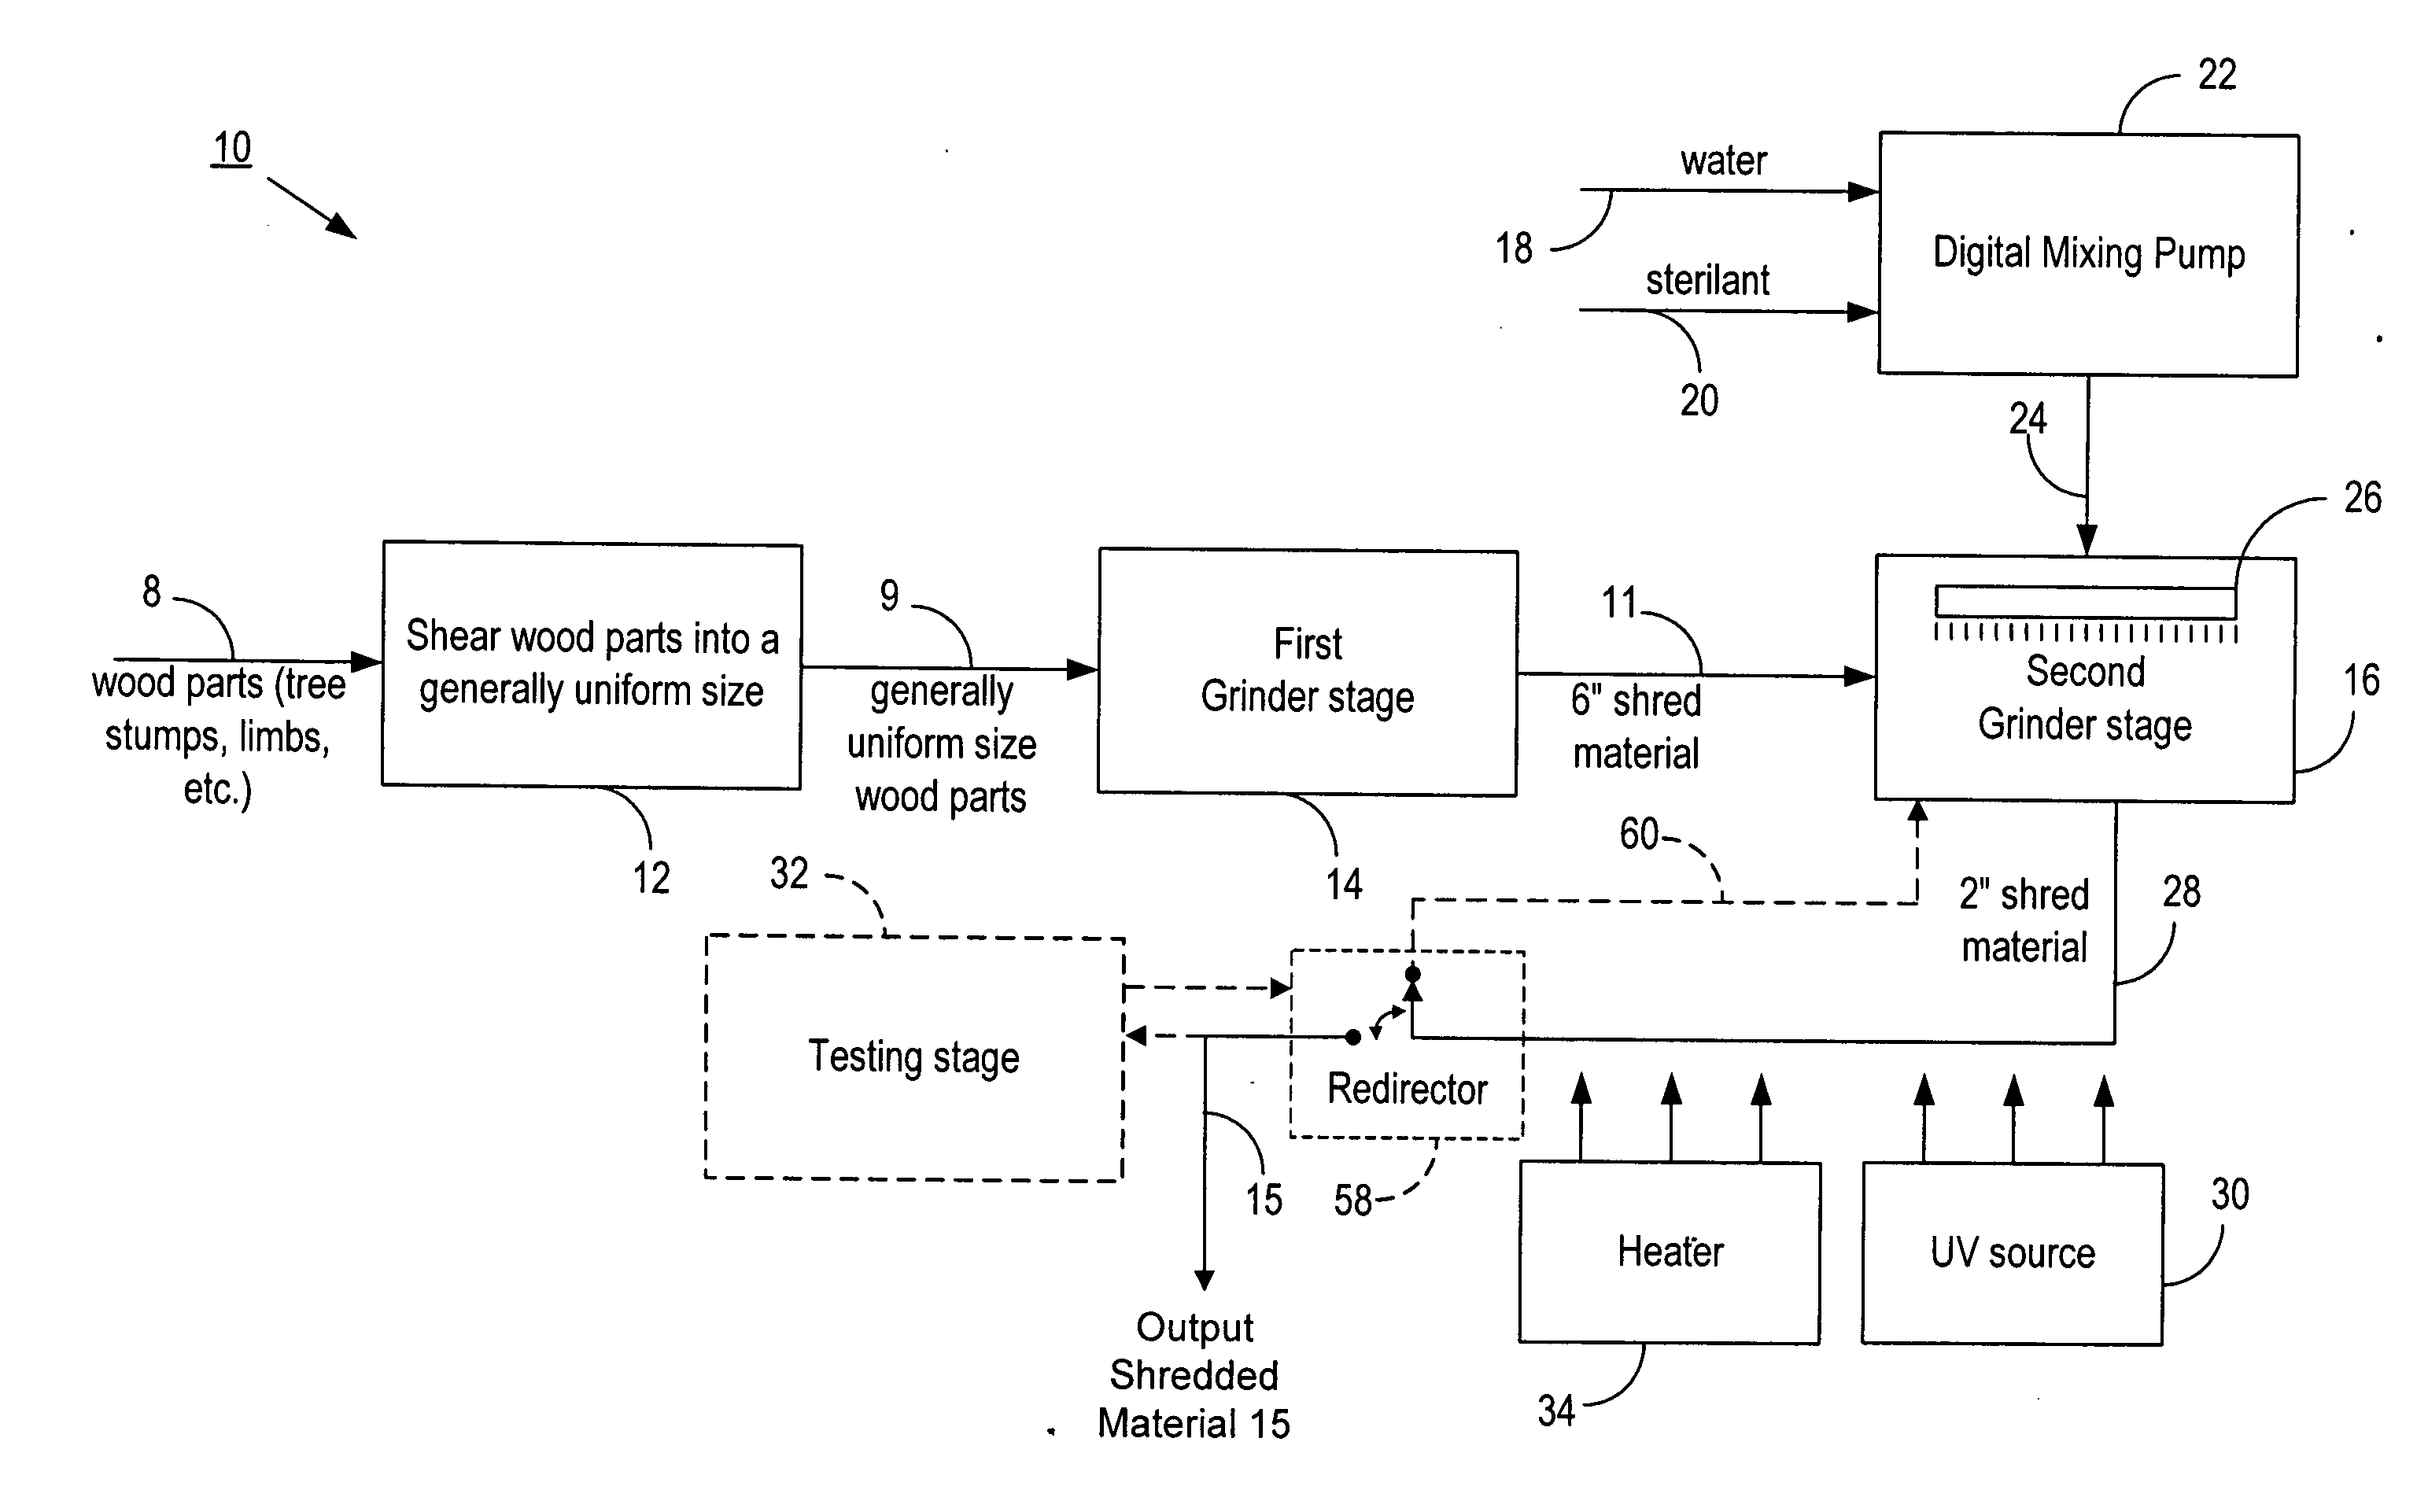 Process and system for producing sterilized shredded material and resulting shredded material